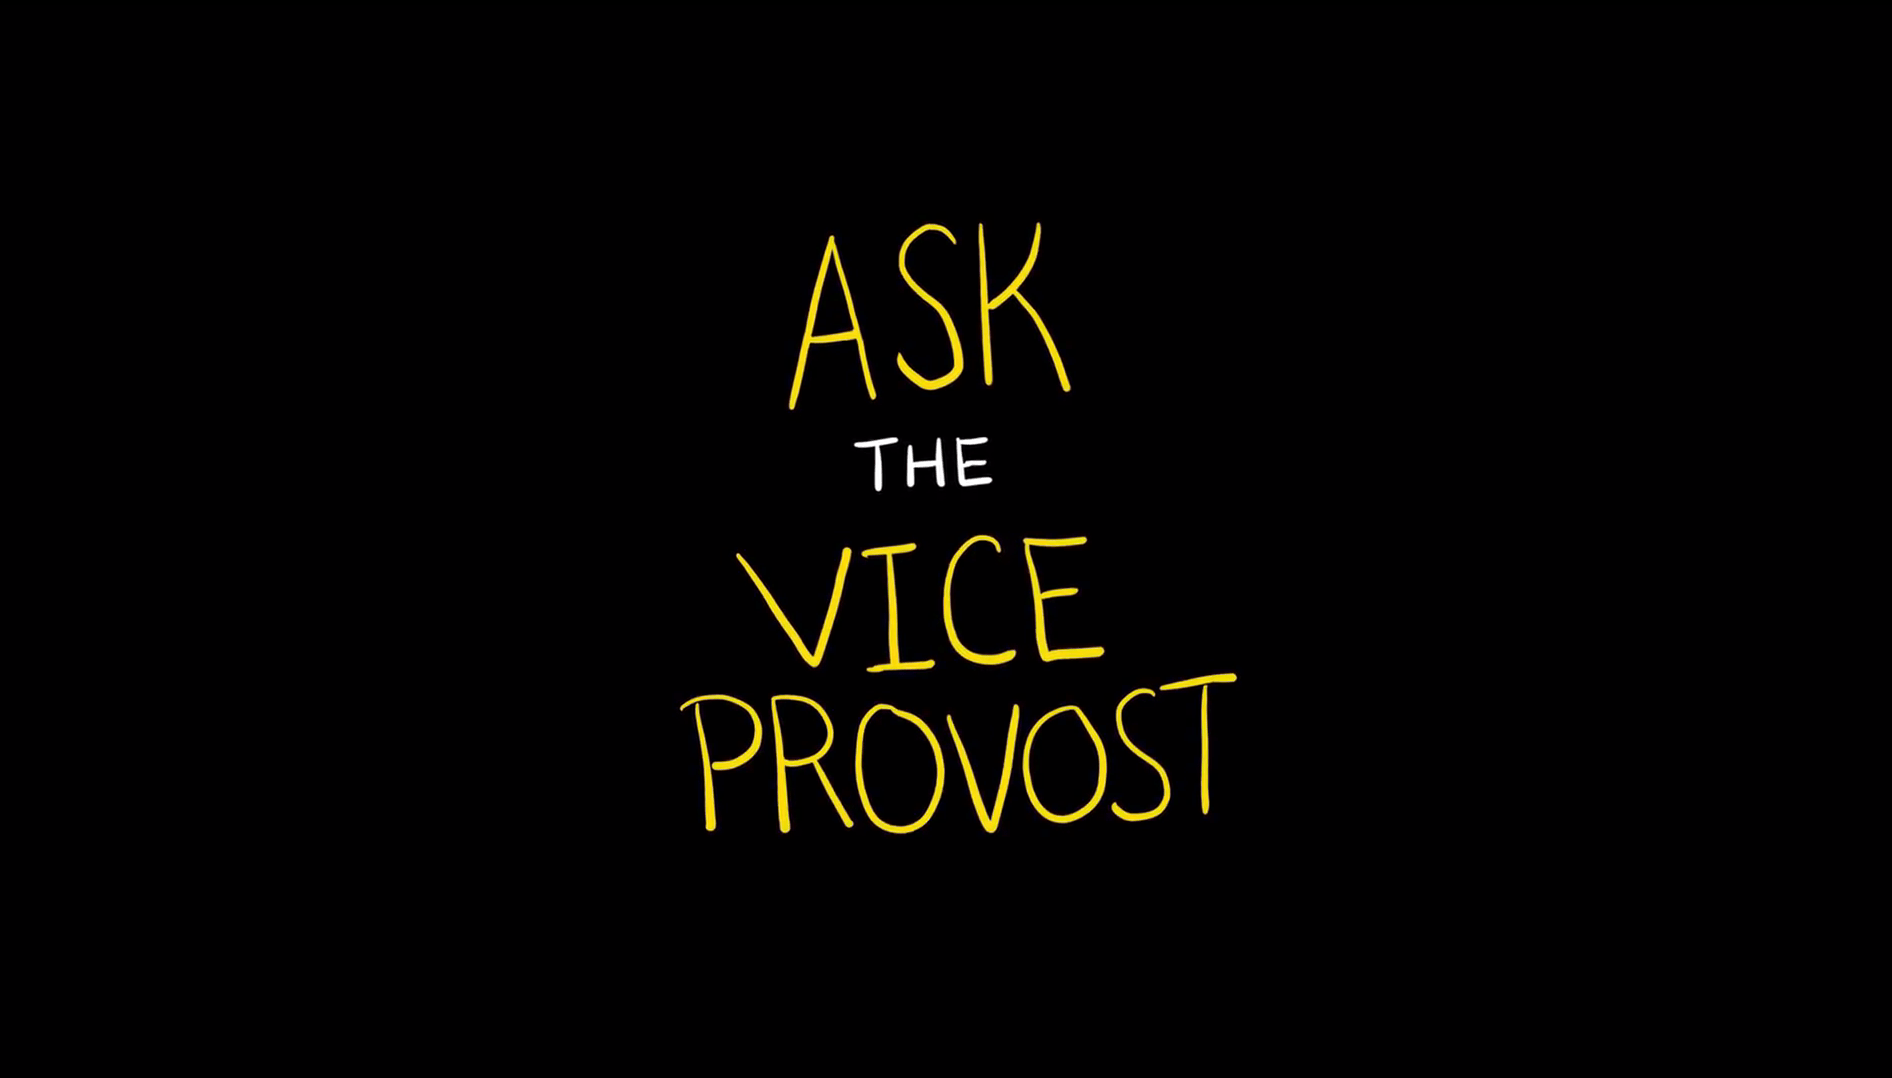 Ask the Vice Provost About… His Book